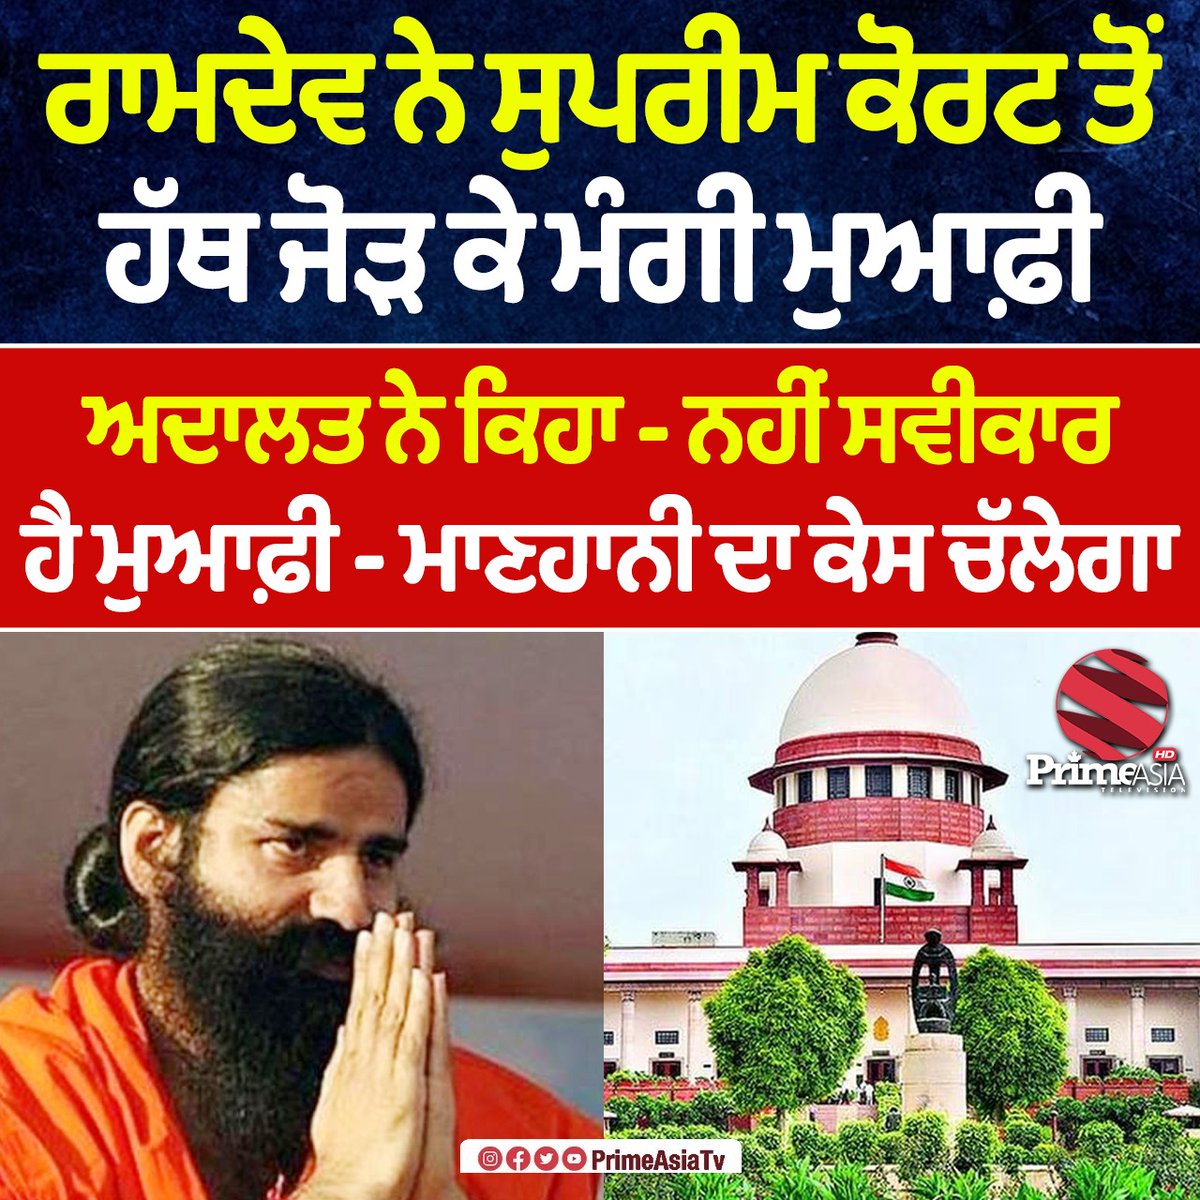 Baba Ramdev Misleading Ads Case Live Updates: Baba Ramdev tenders unconditional apology before SC for violating court's order.